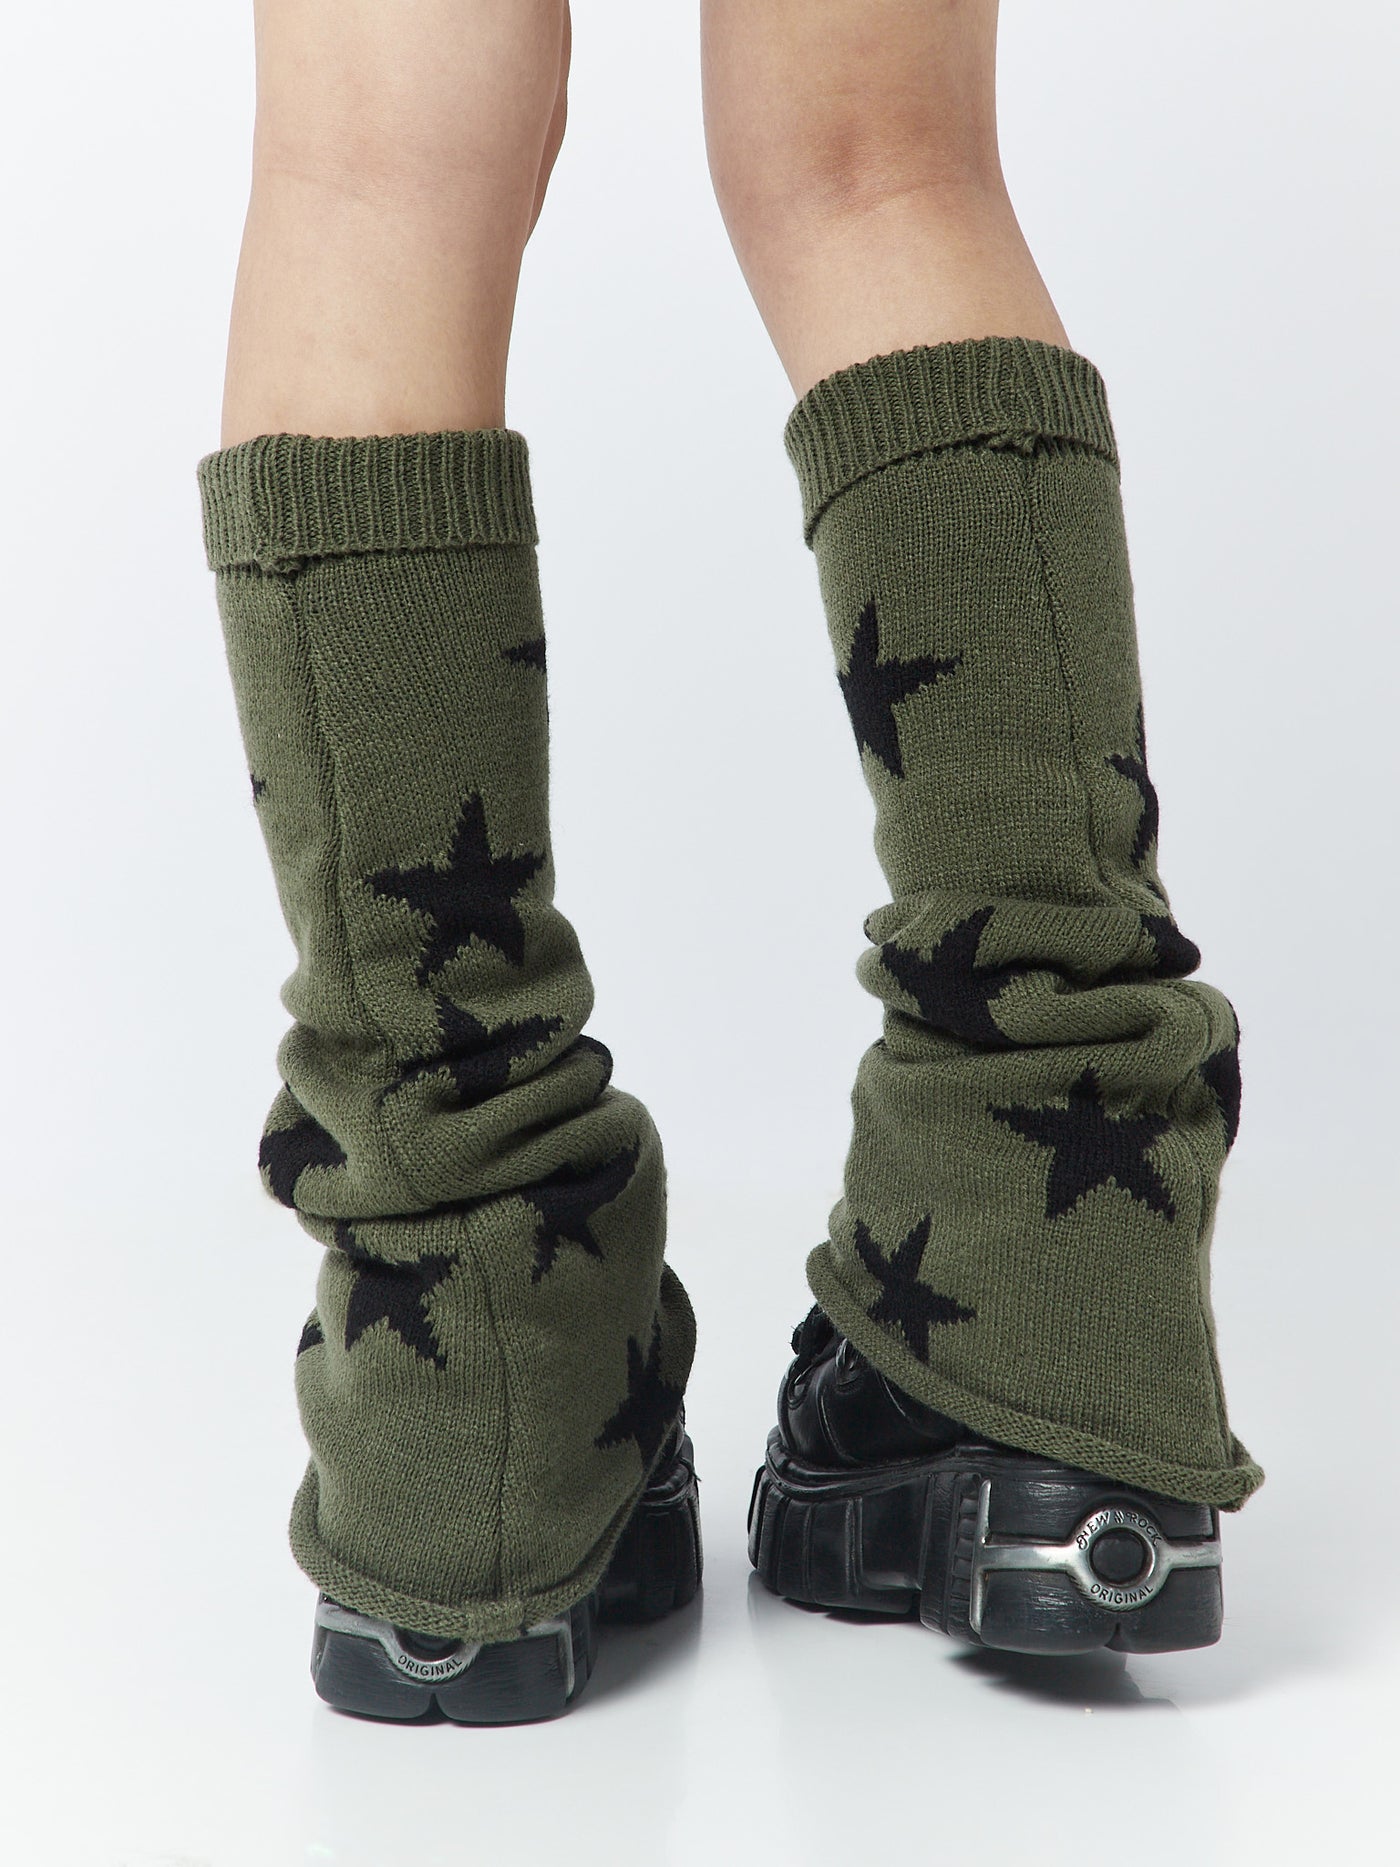 Flare leg warmers with star accents by Minga London, adding a touch of celestial charm to your outfit while keeping your legs cozy and stylish.